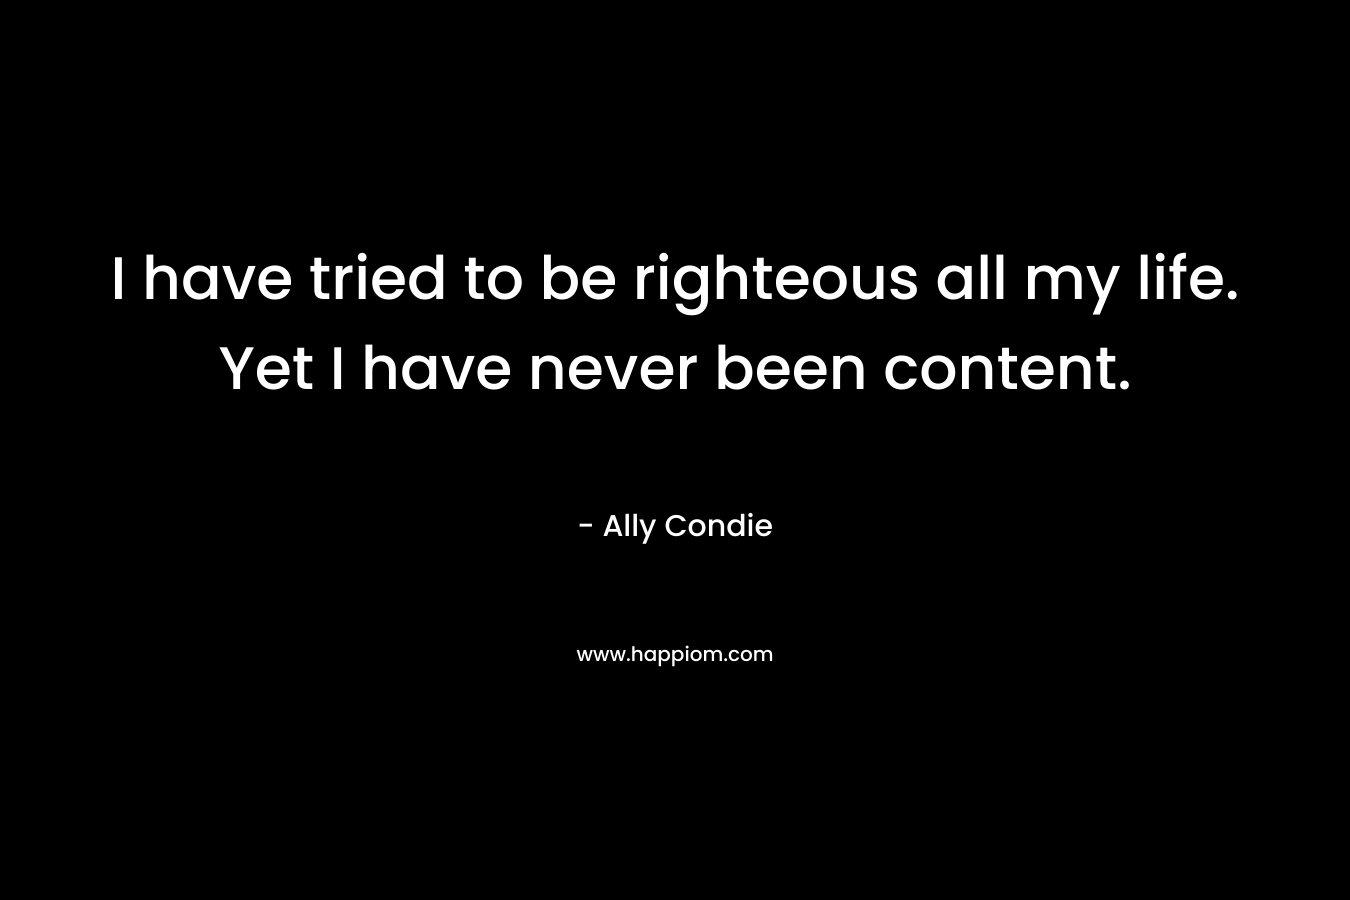 I have tried to be righteous all my life. Yet I have never been content.